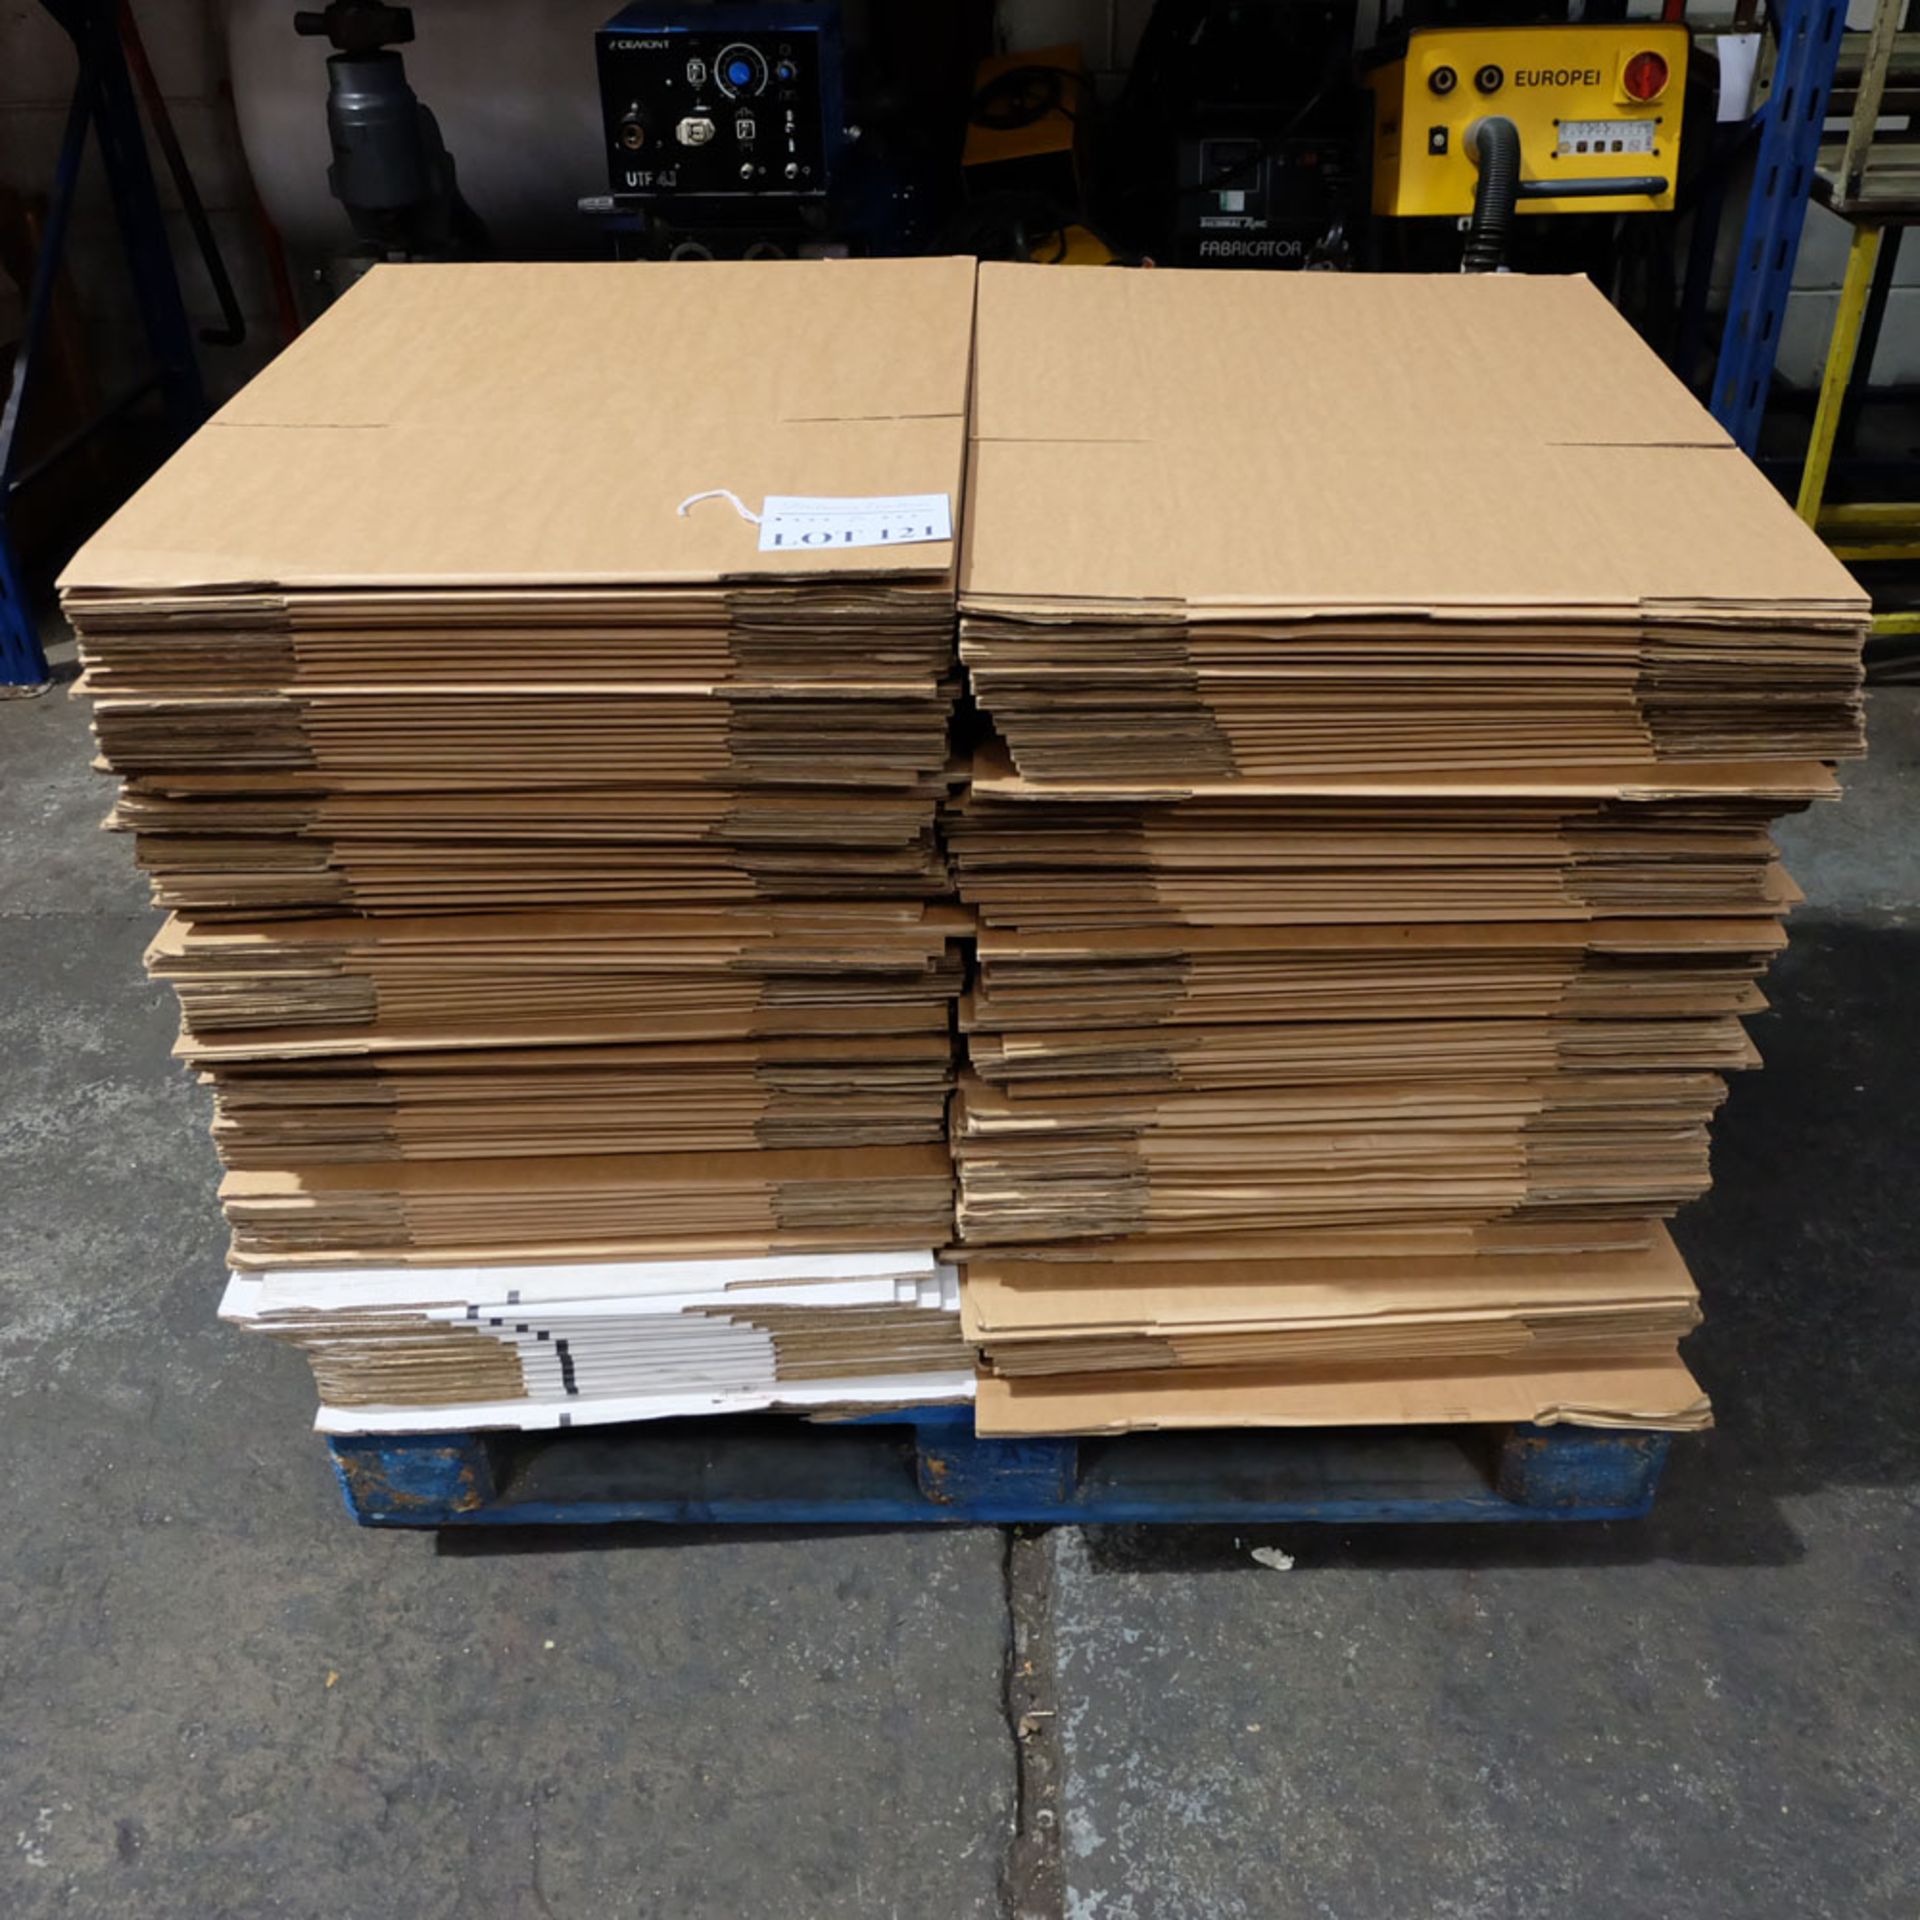 Pallet of Cardboard Boxes. Approx Size (flat) 24 1/2 x 32".